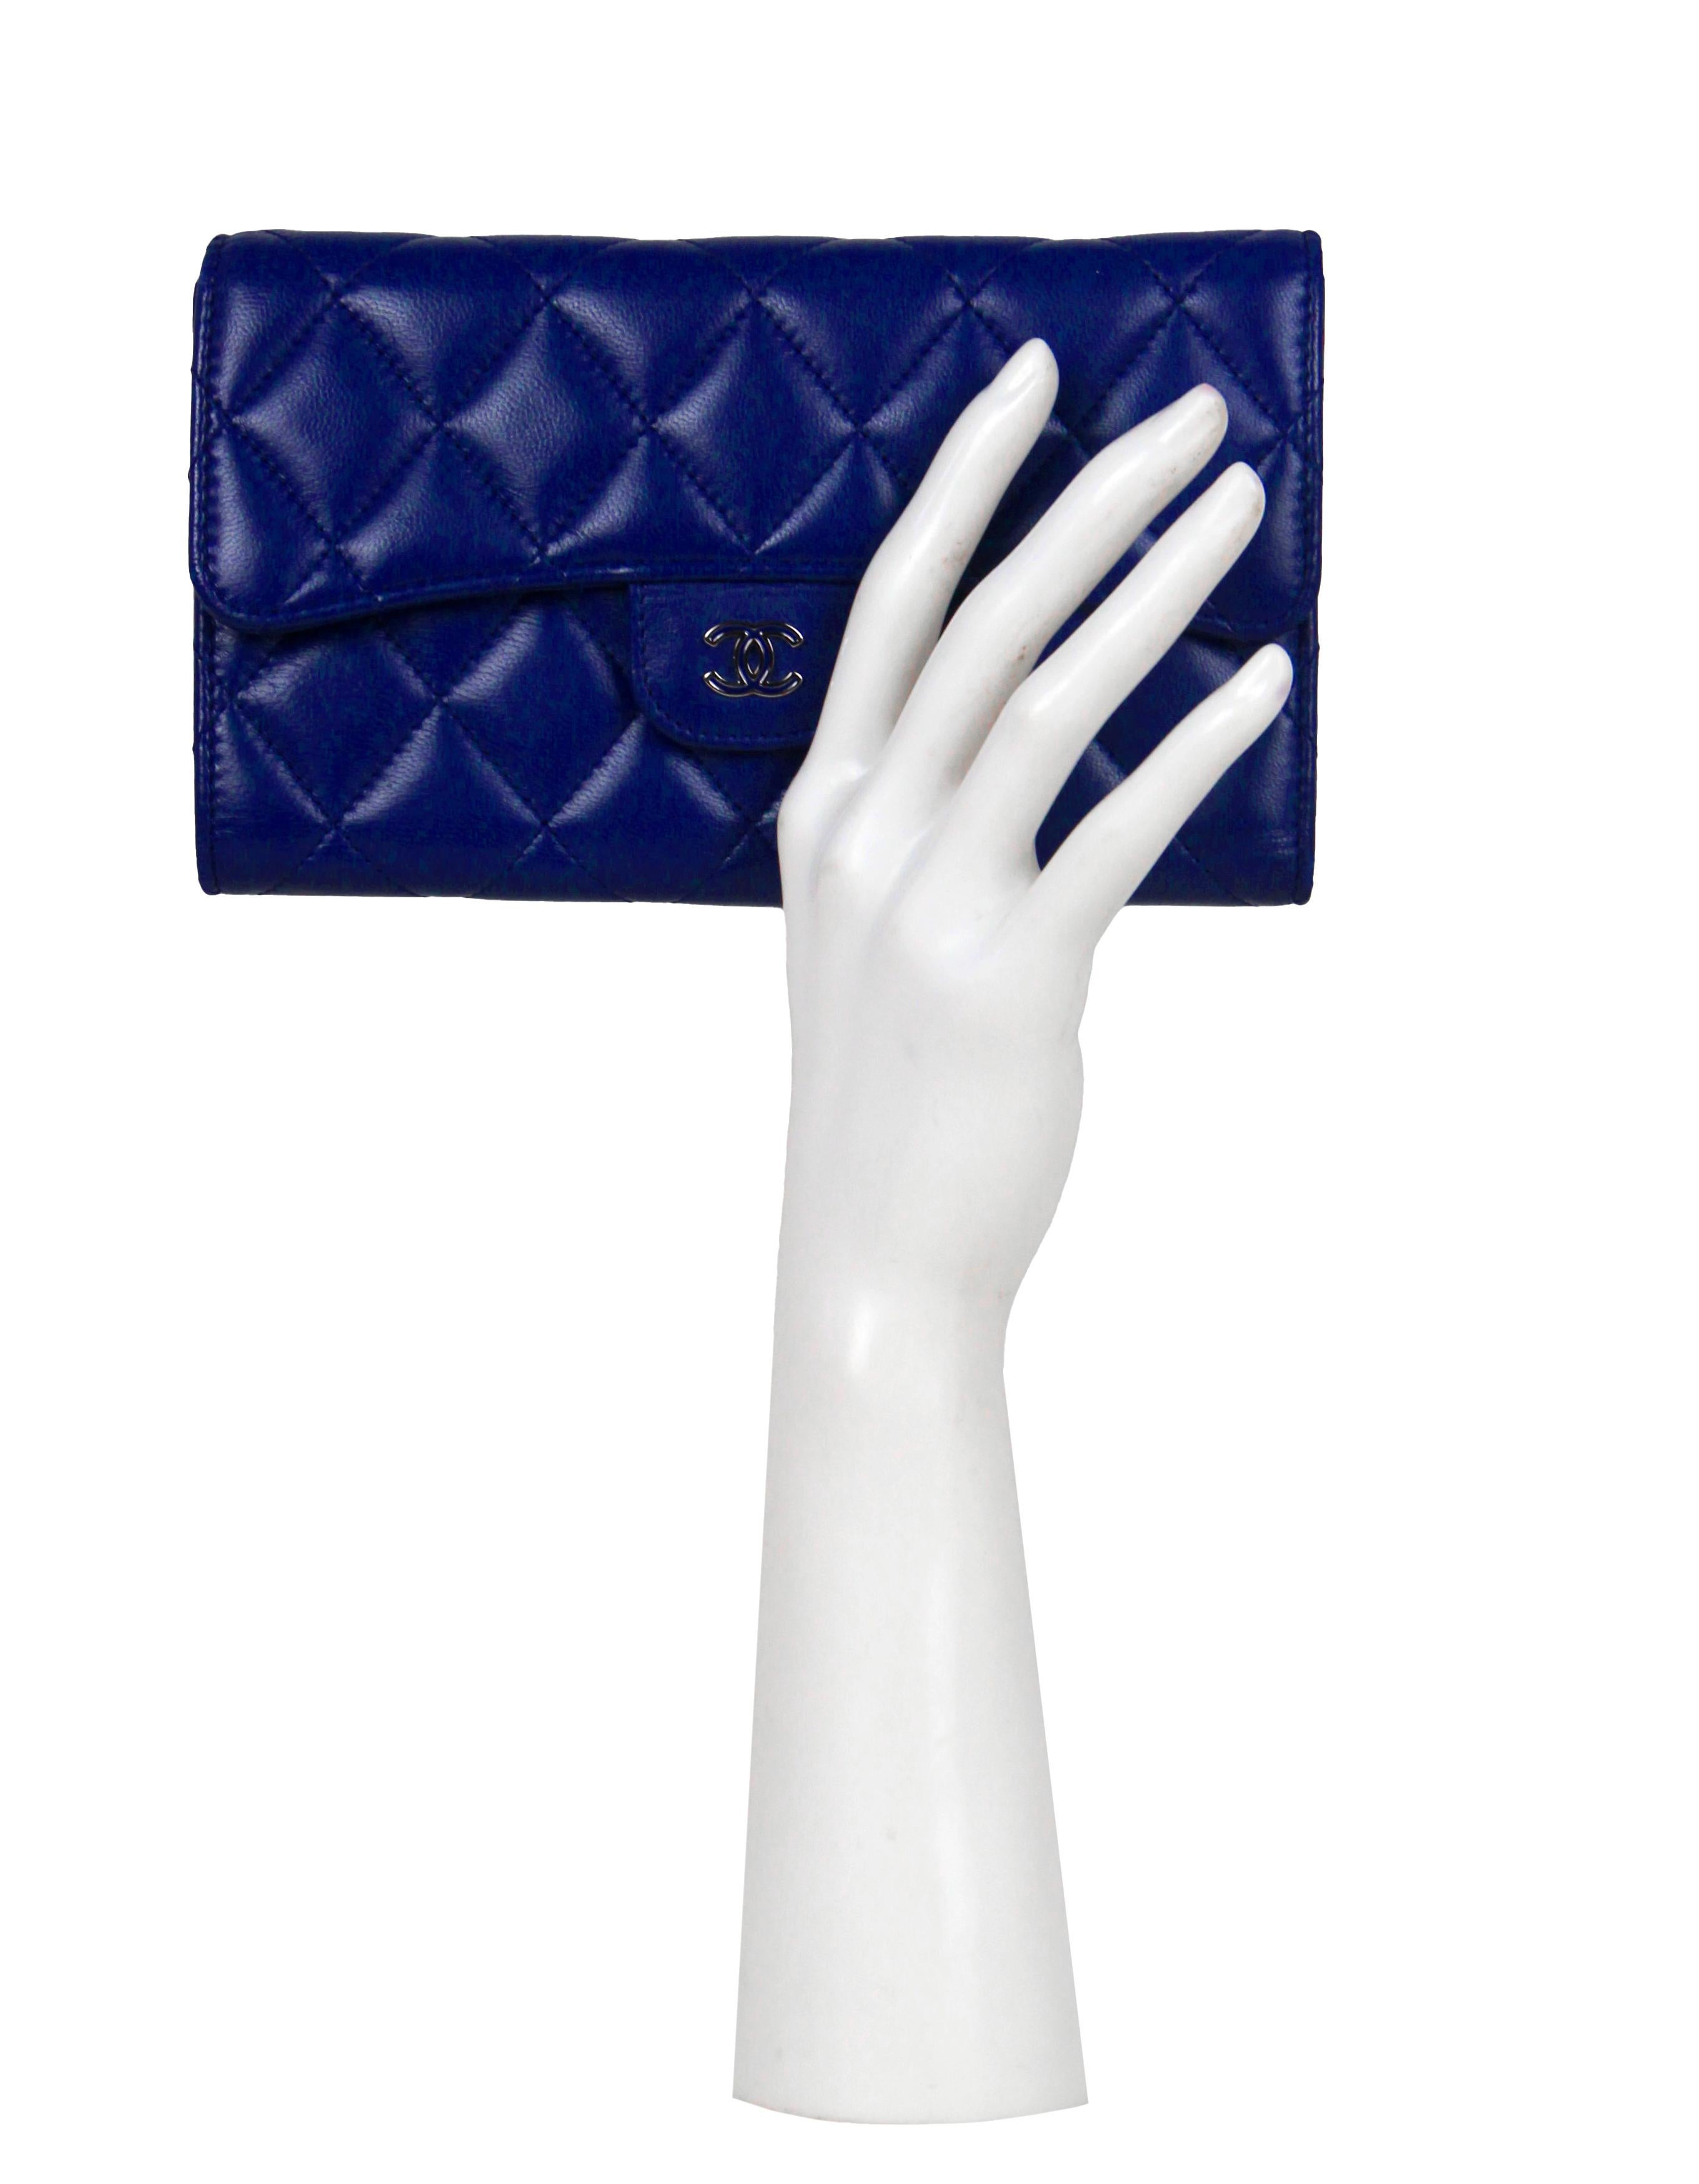 Chanel Blue Lambskin Quilted Large Gusset Flap Wallet

Made In: Spain
Year of Production: 2014-2014
Color: Blue
Hardware: Silvertone and blue enamel
Materials: Lambskin leather
Lining: Smooth leather
Closure/Opening: Flap with snap
Exterior Pockets: